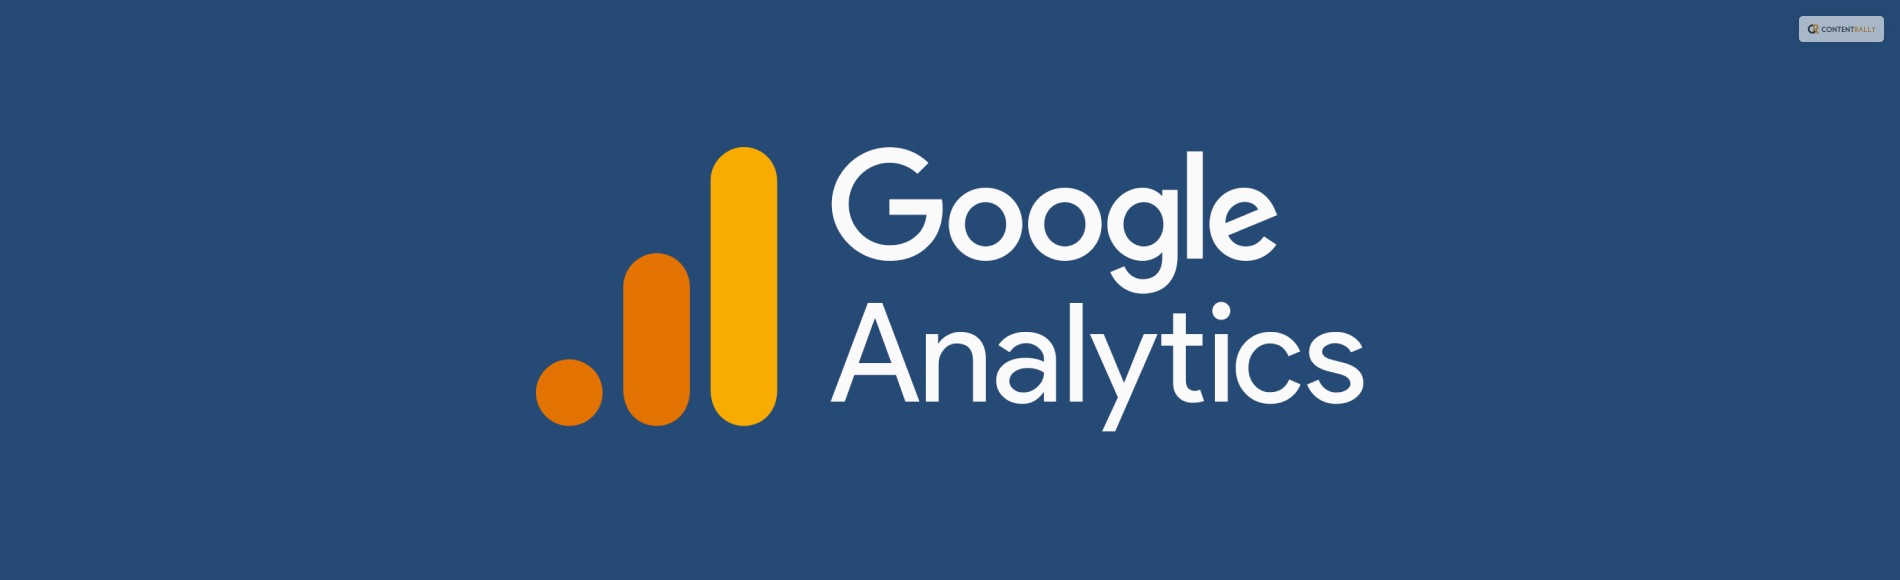 what data does google analytics prohibit collecting